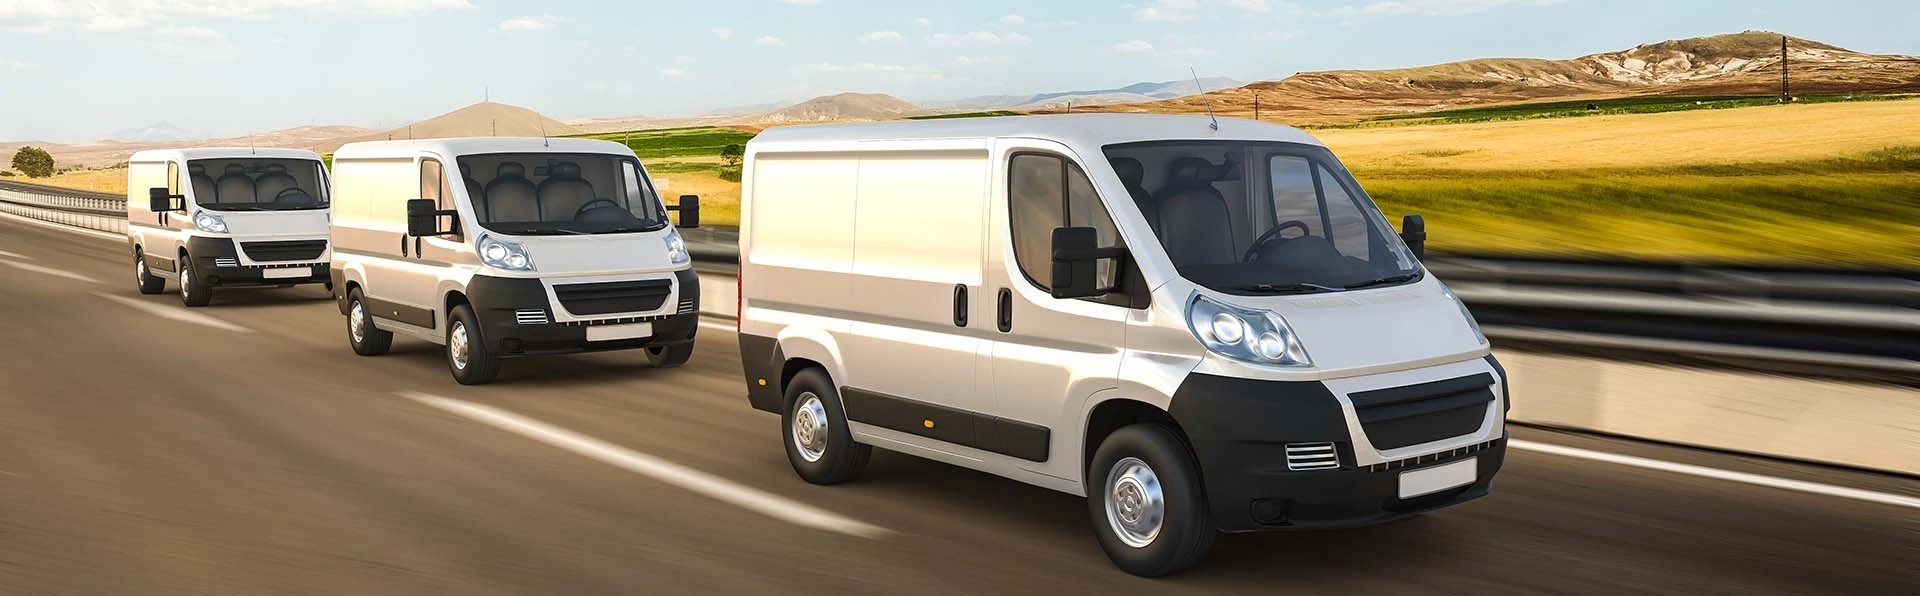 Top Tips for Leasing a Commercial Vehicle